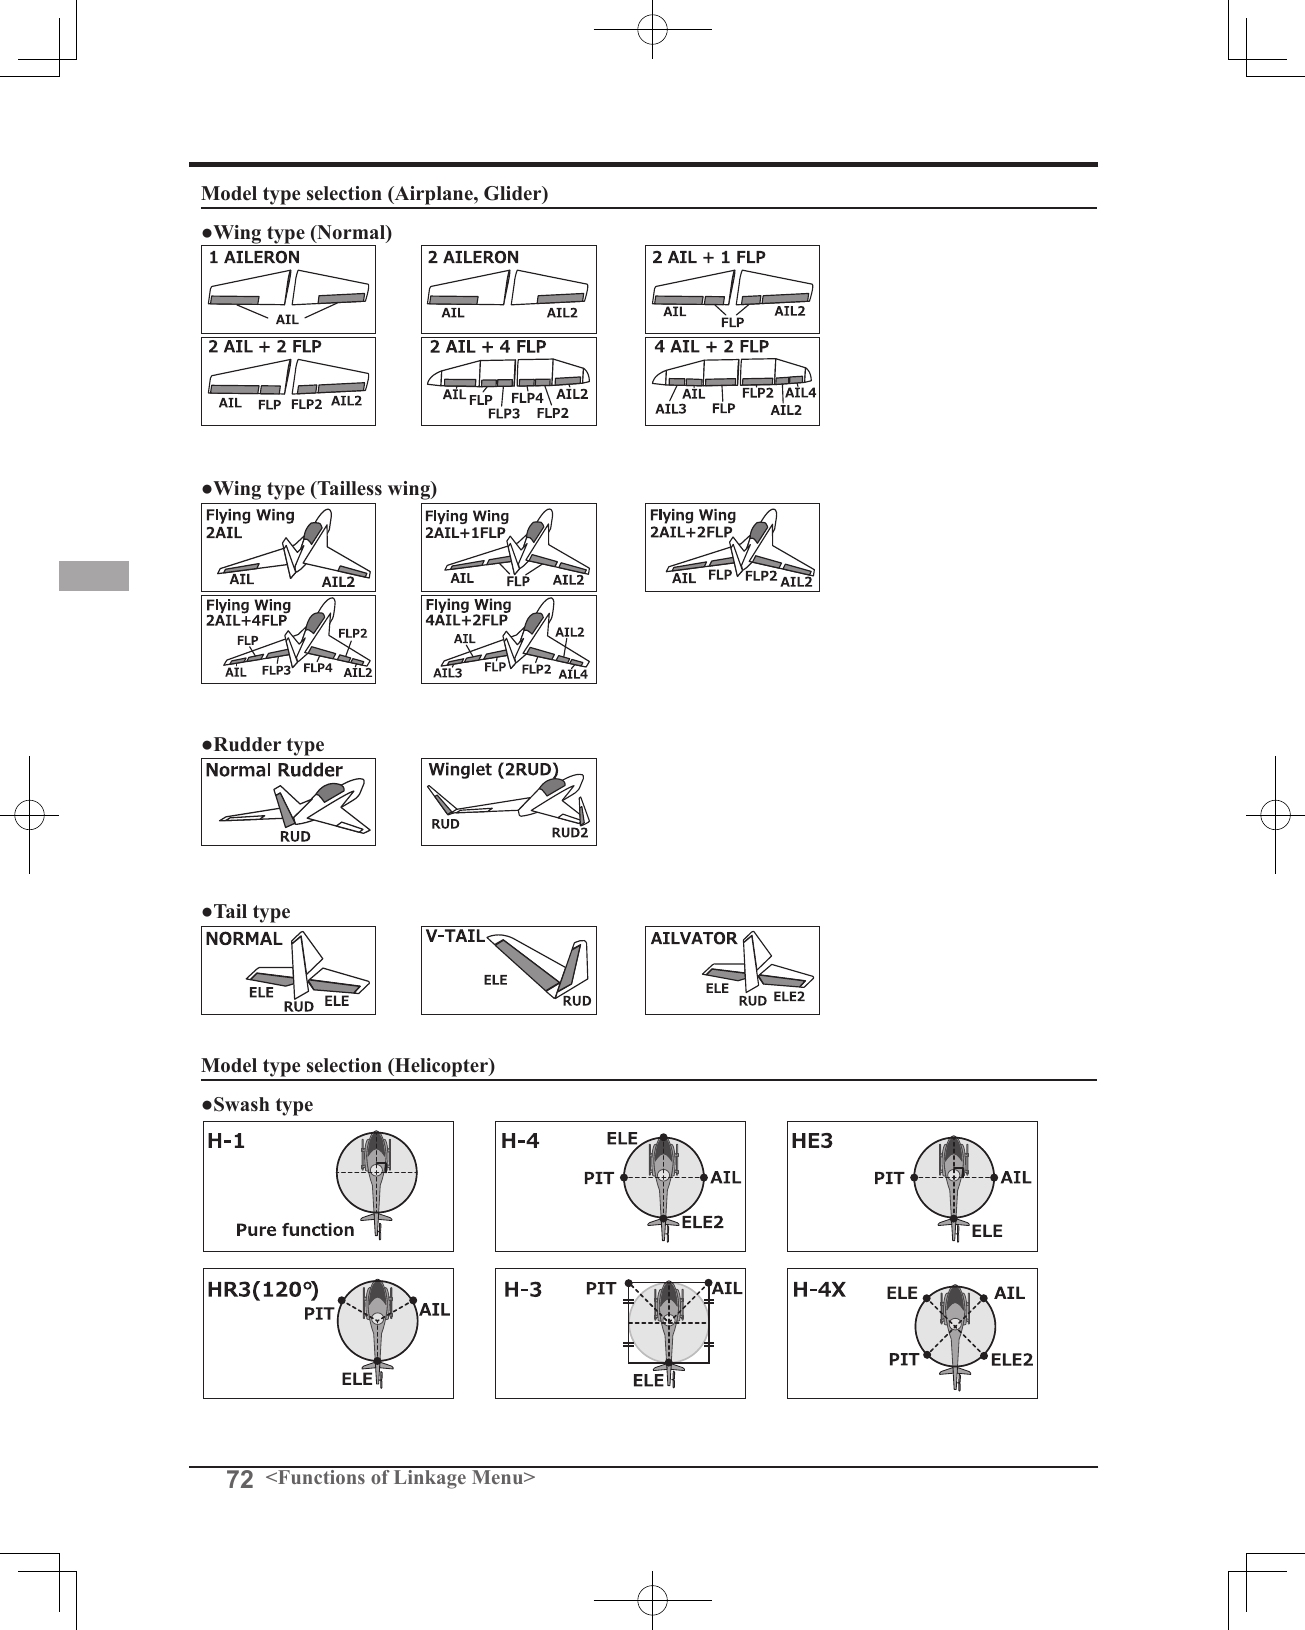 72 &lt;Functions of Linkage Menu&gt;Model type selection (Airplane, Glider)●Wing type (Normal)  ●Wing type (Tailless wing)  ●Rudder type●Tail type Model type selection (Helicopter)●Swash type